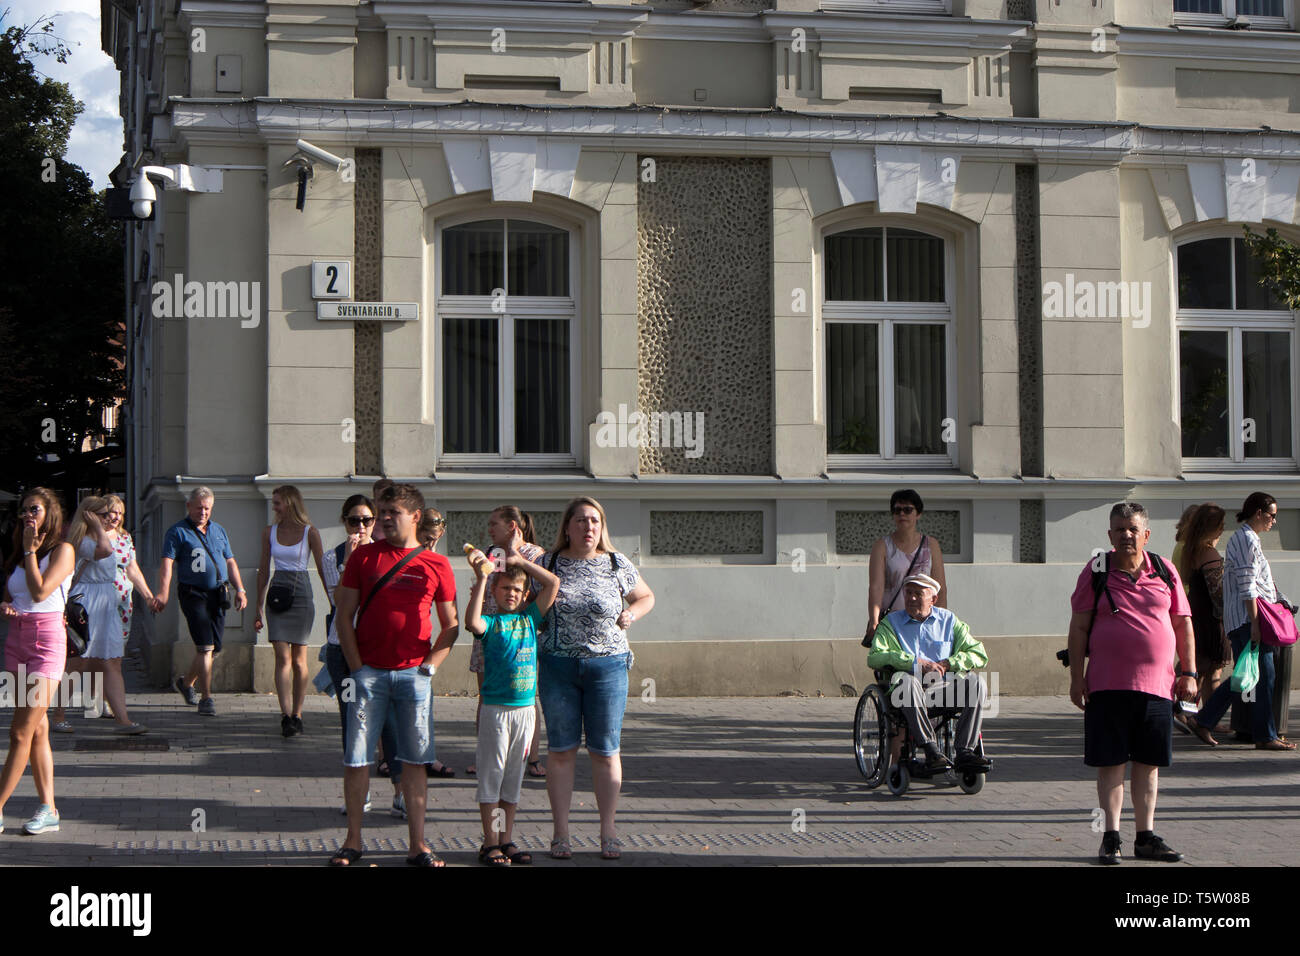 Vilnius, Lithuania - April 16, 2019 , People at a pedestrian crossing waiting for a green light Stock Photo